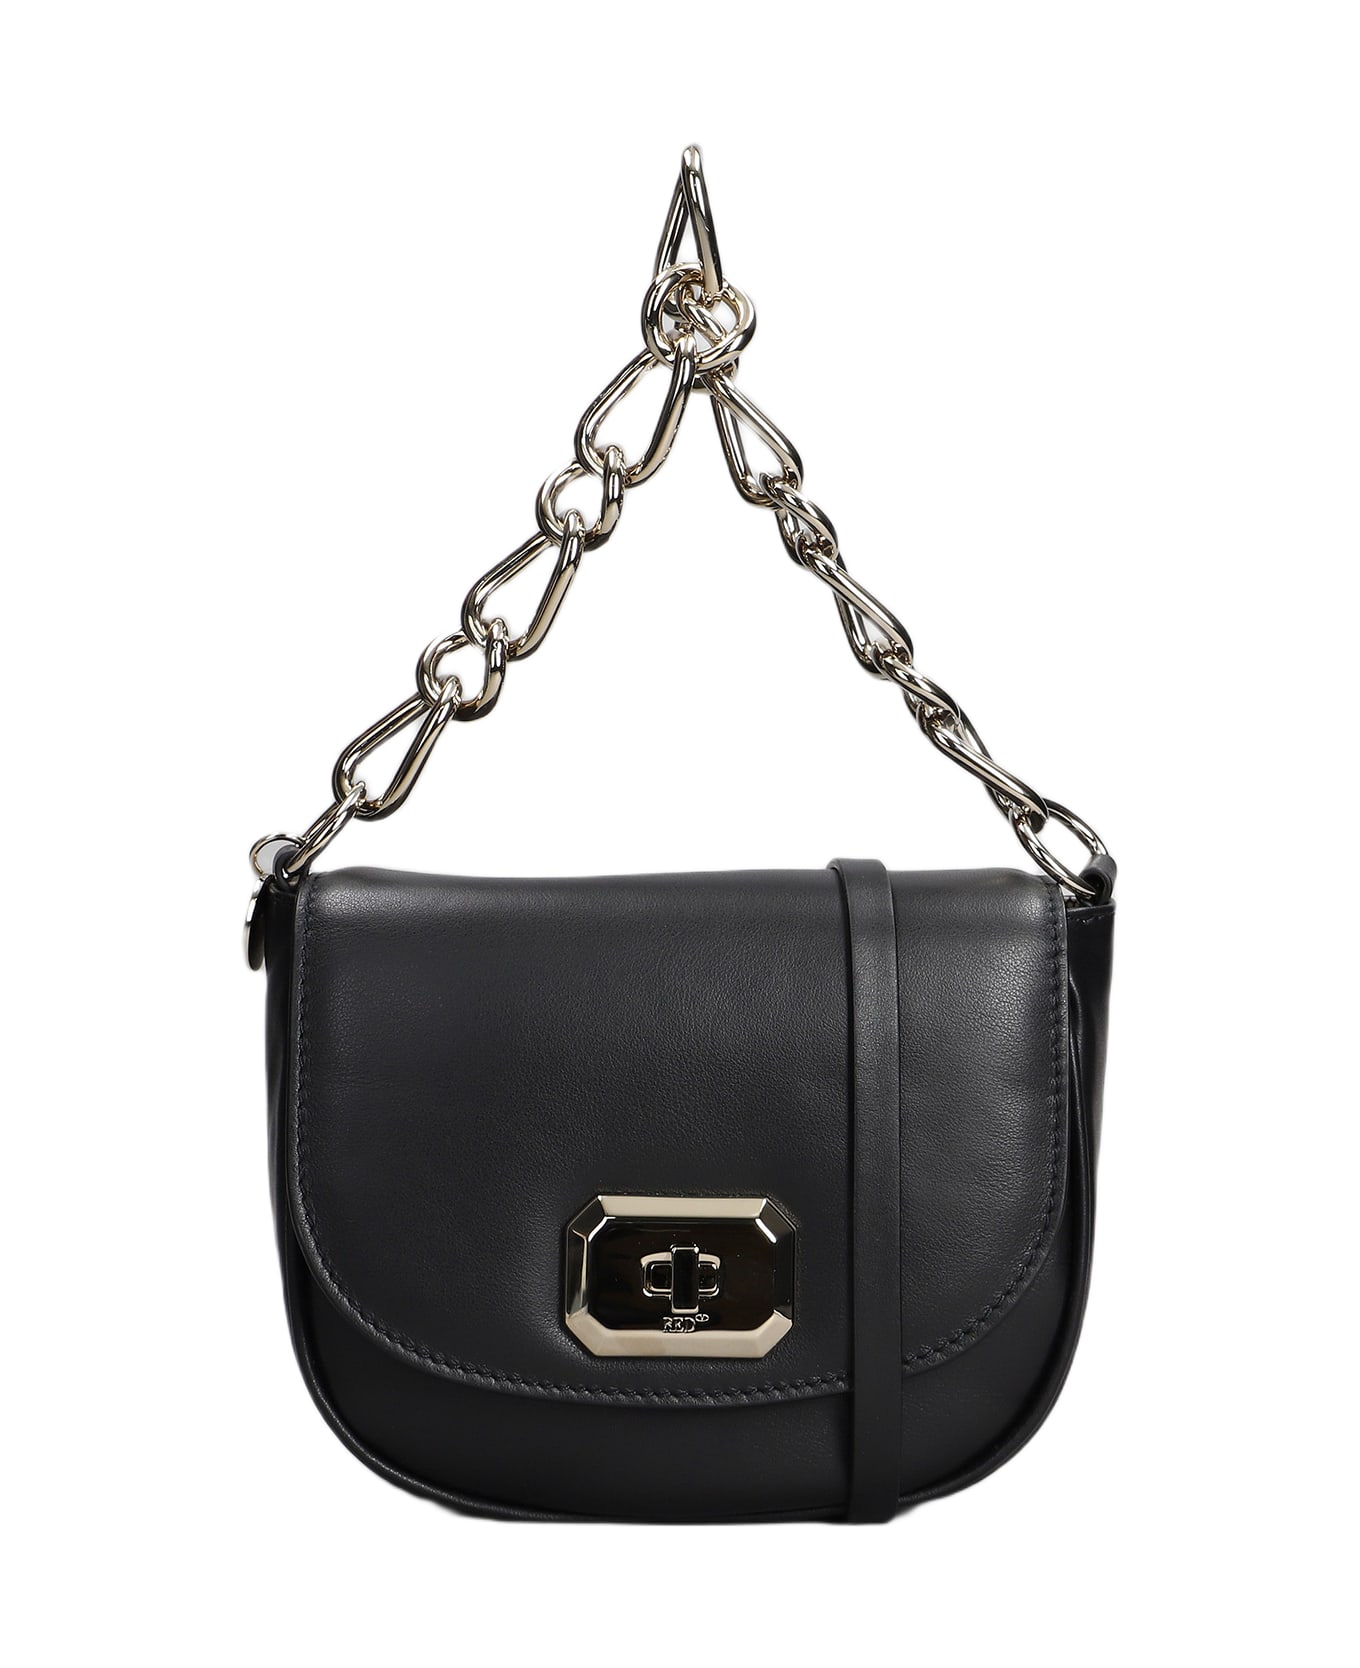 RED Valentino Hand Bag In Black Leather - No Nero ショルダーバッグ